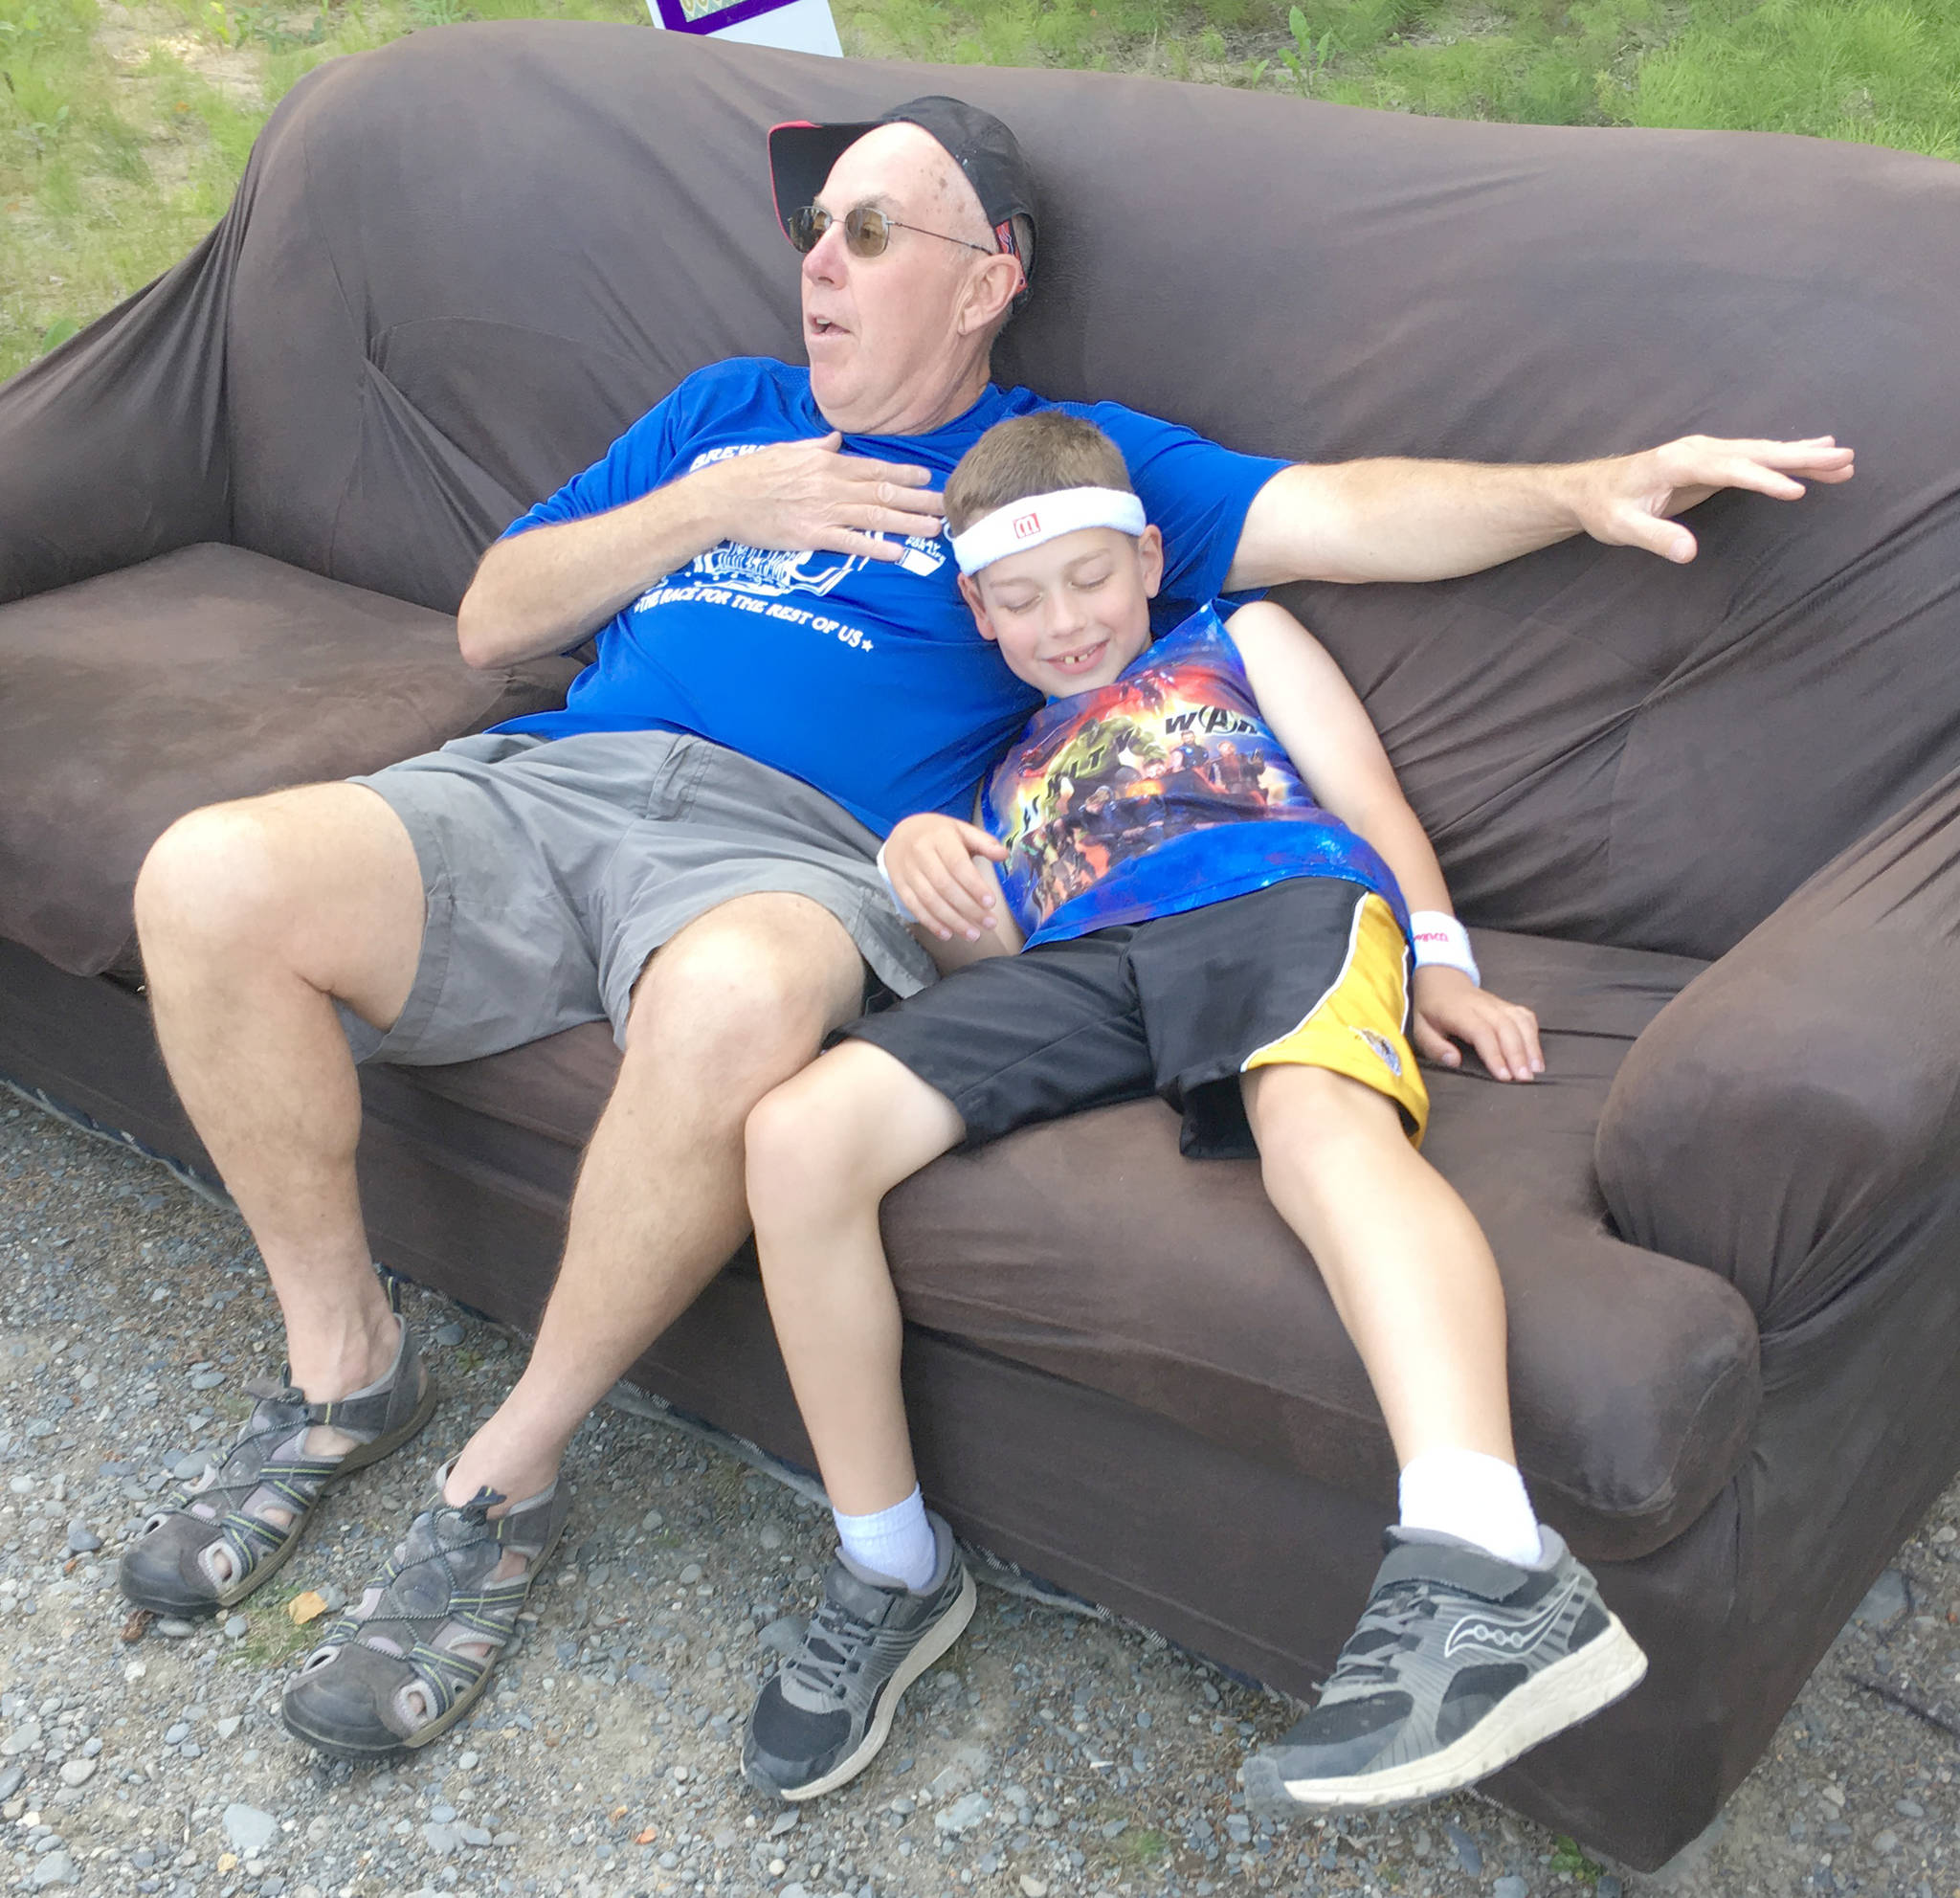 Nikiski’s Alan Bute and his grandson, Bennett Martin, donate $5 to take a break on the couch during the Brewery to Bathroom .5K “The race for the rest of us” on Sunday, Aug. 11, 2019, in Soldotna, Alaska. (Photo by Jeff Helminiak/Peninsula Clarion)